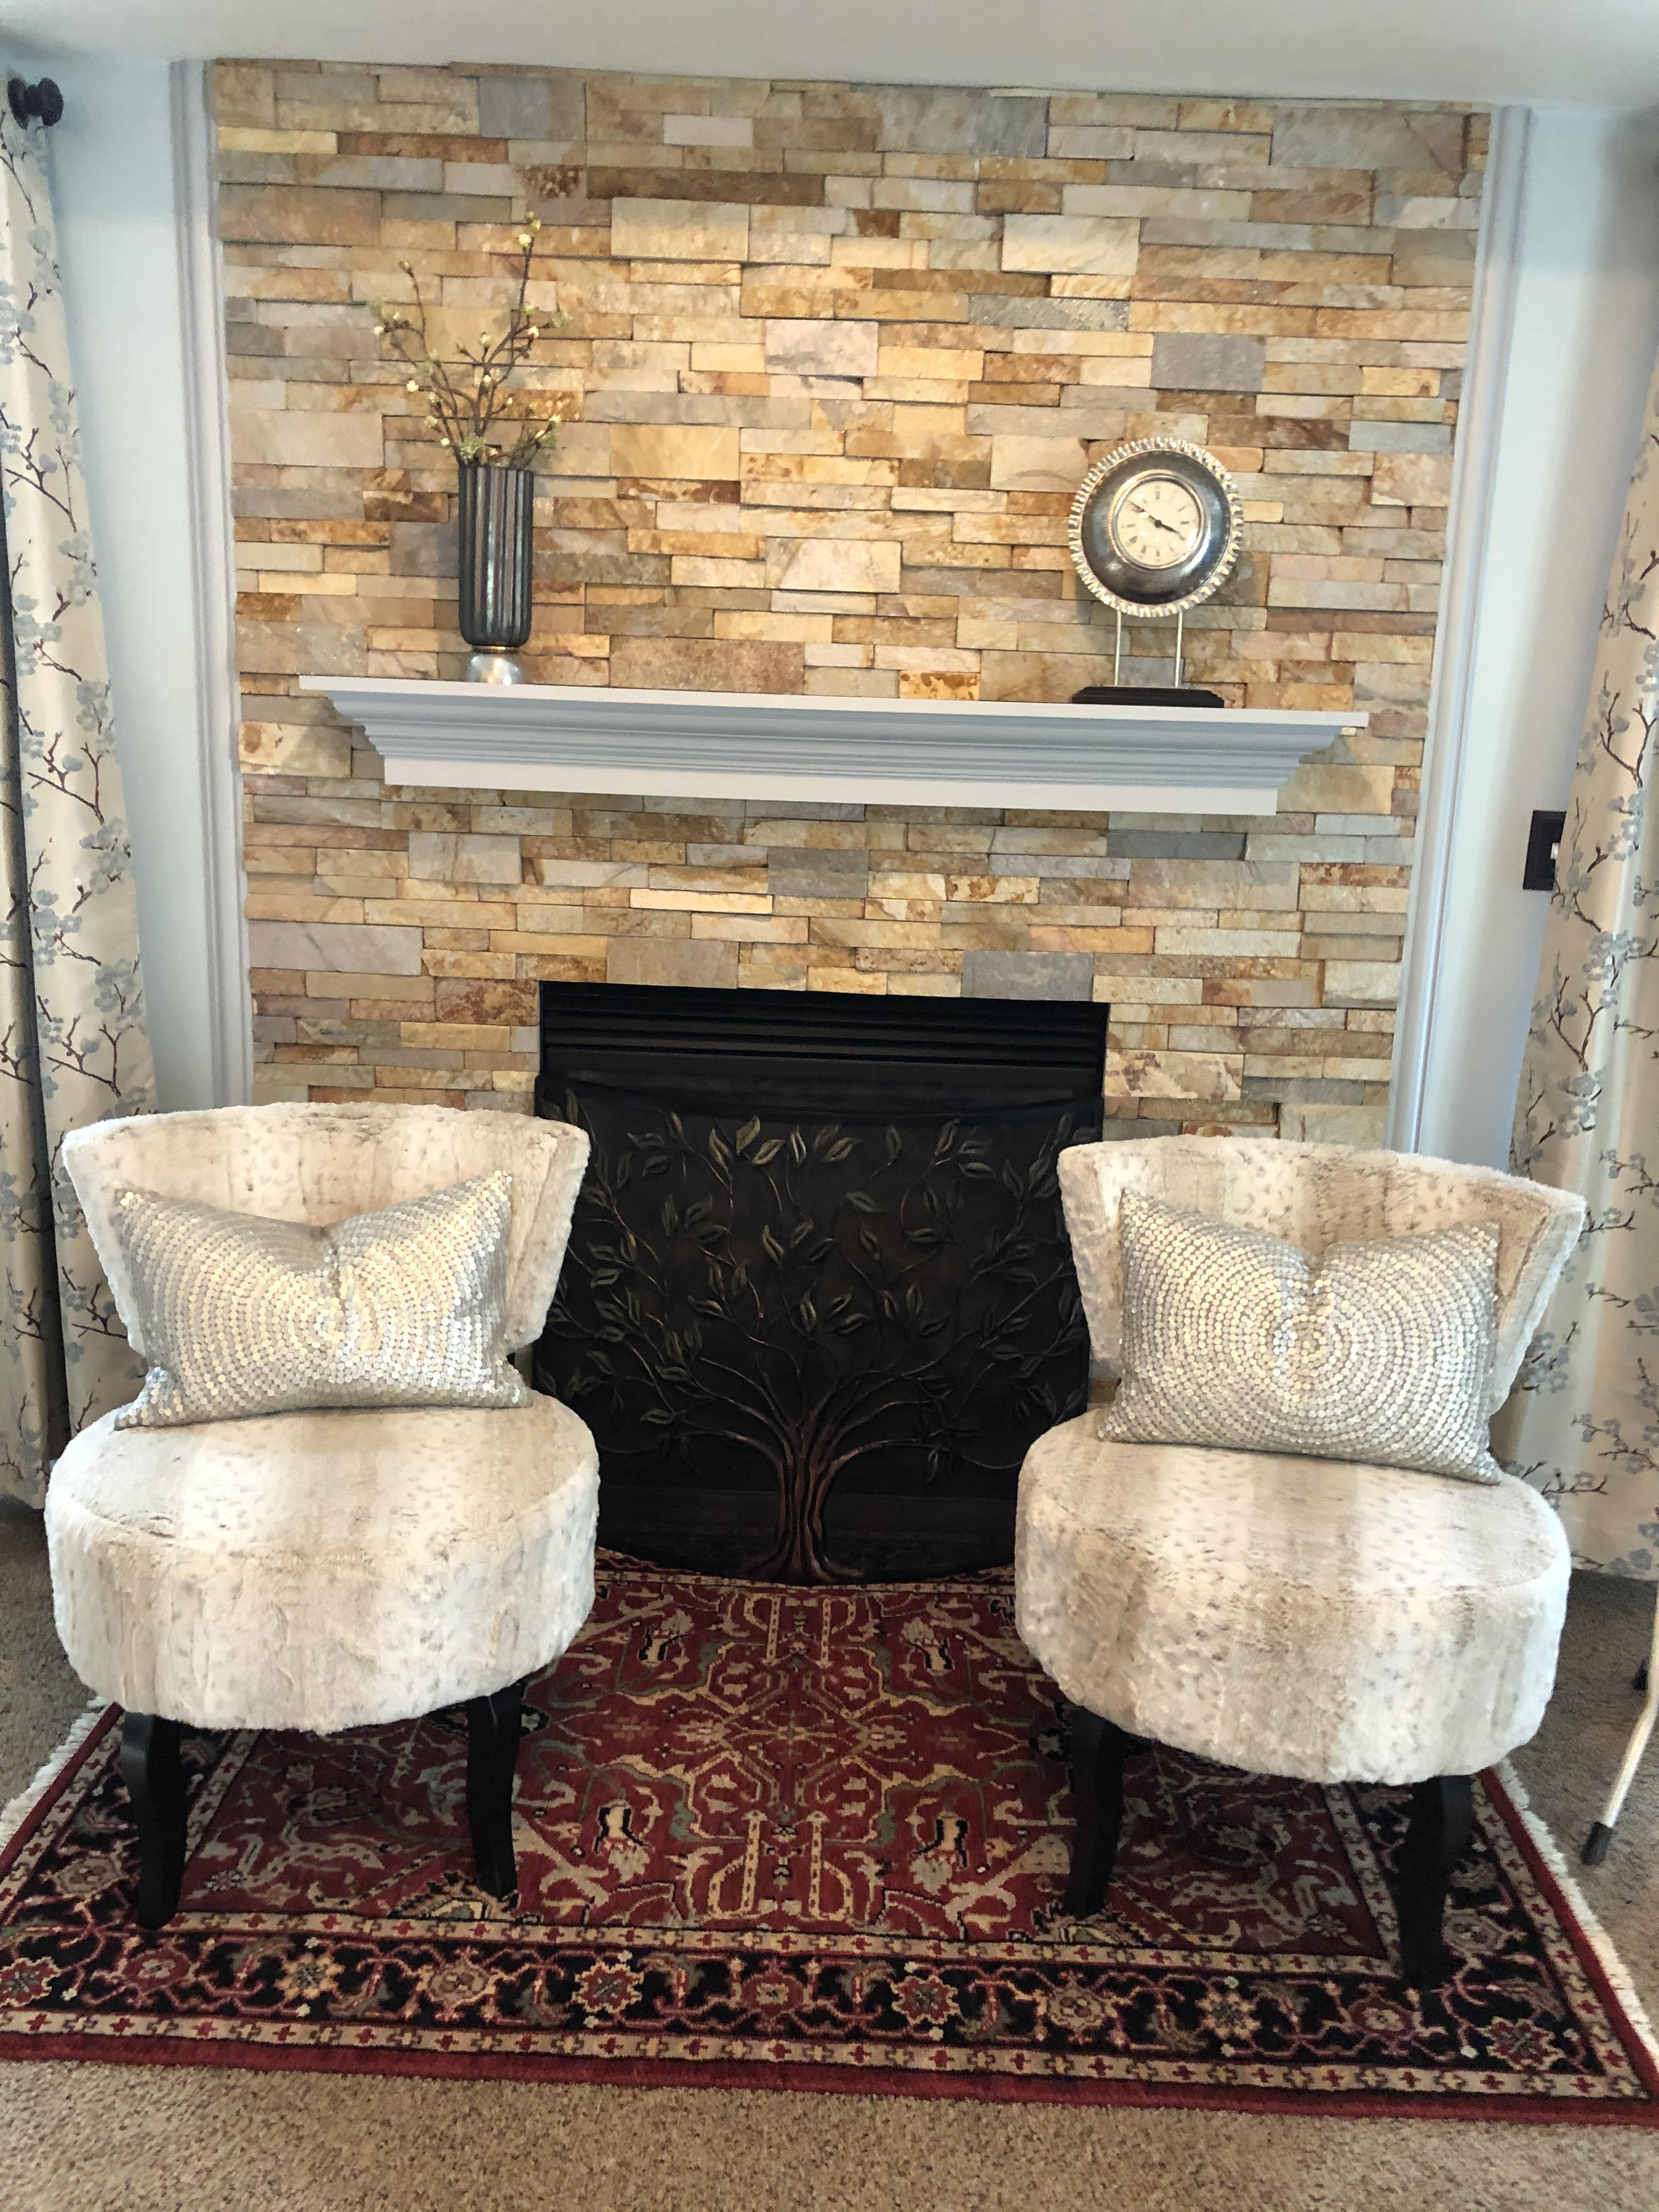 Before and after photos of a residential fireplace renovation project featuring Norstone Aztec XL Series Rock Panels